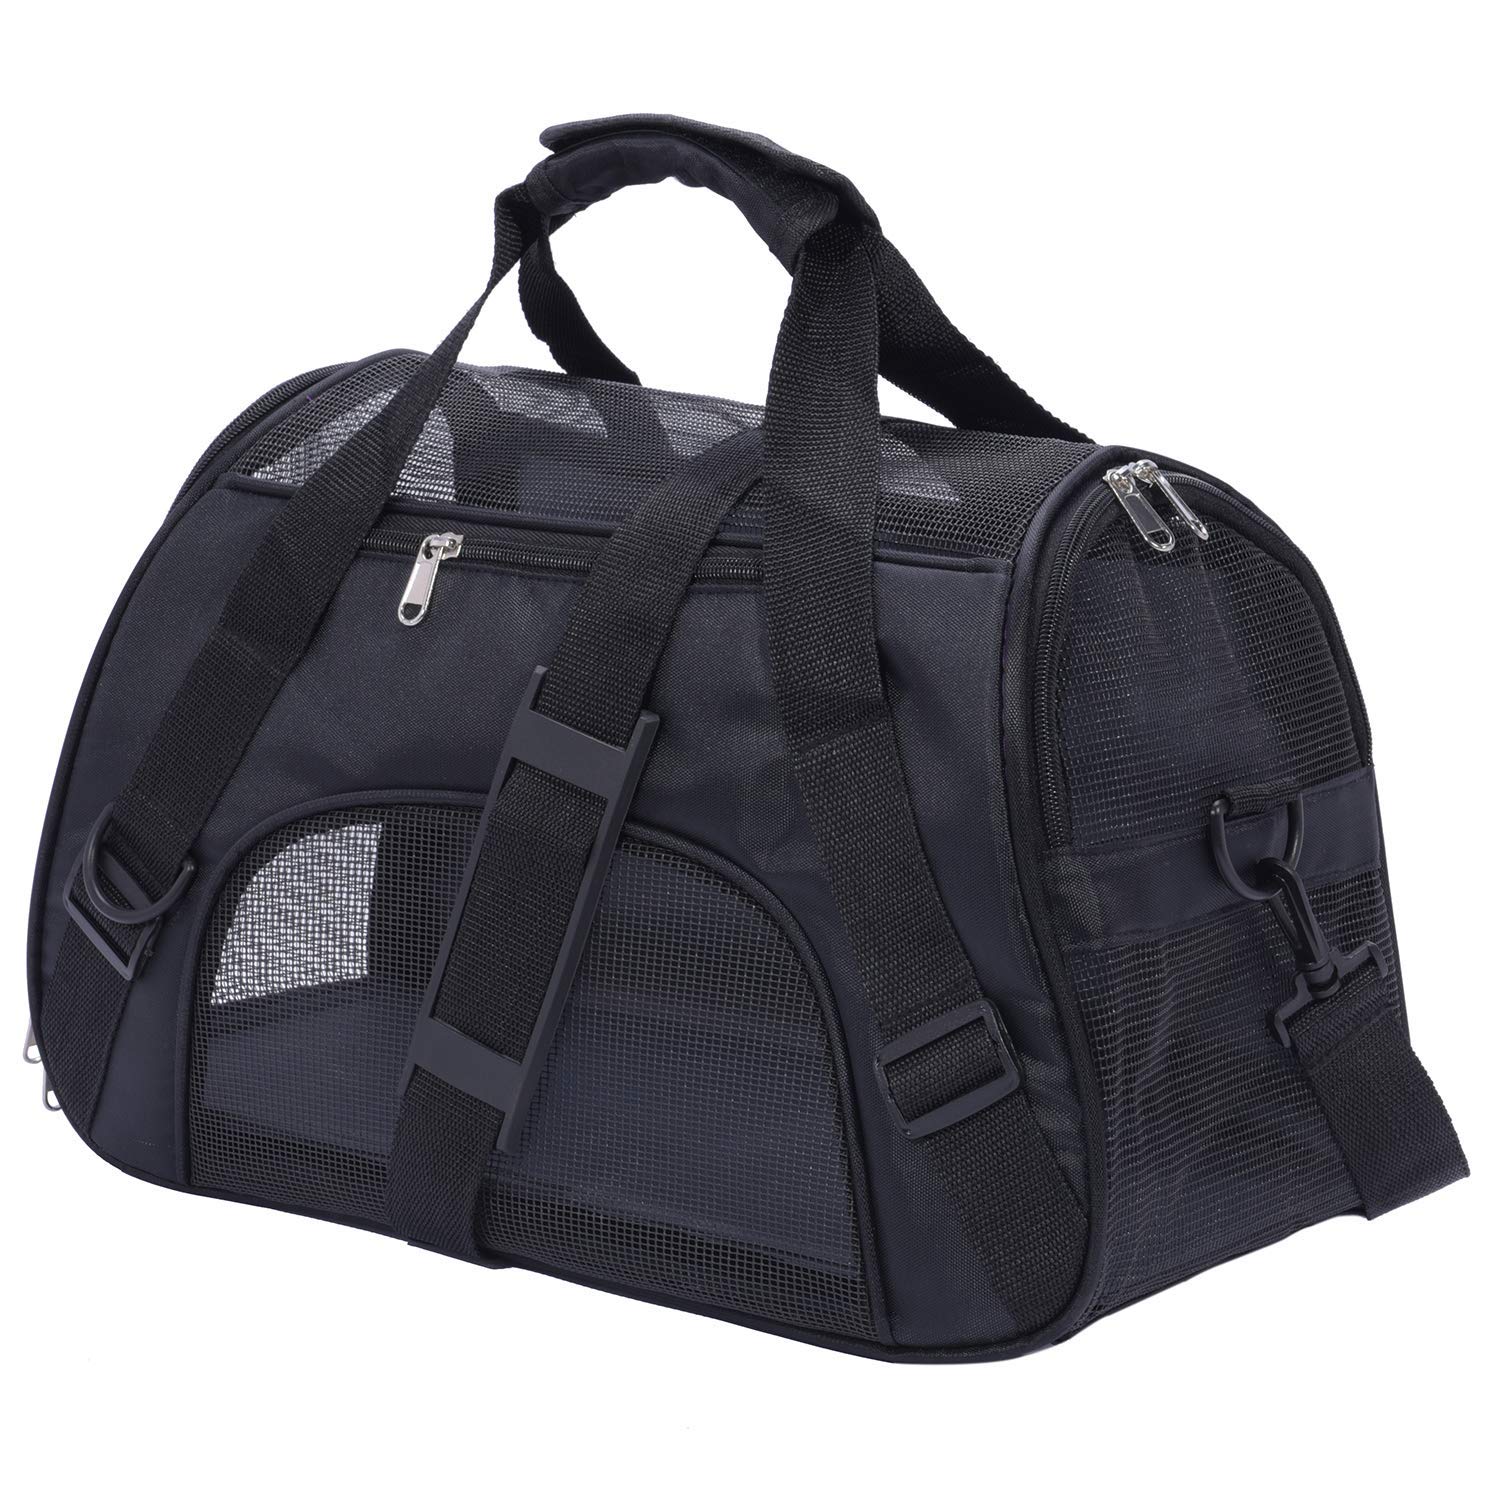 Small Cats Travel Carrier Airline Approved Black